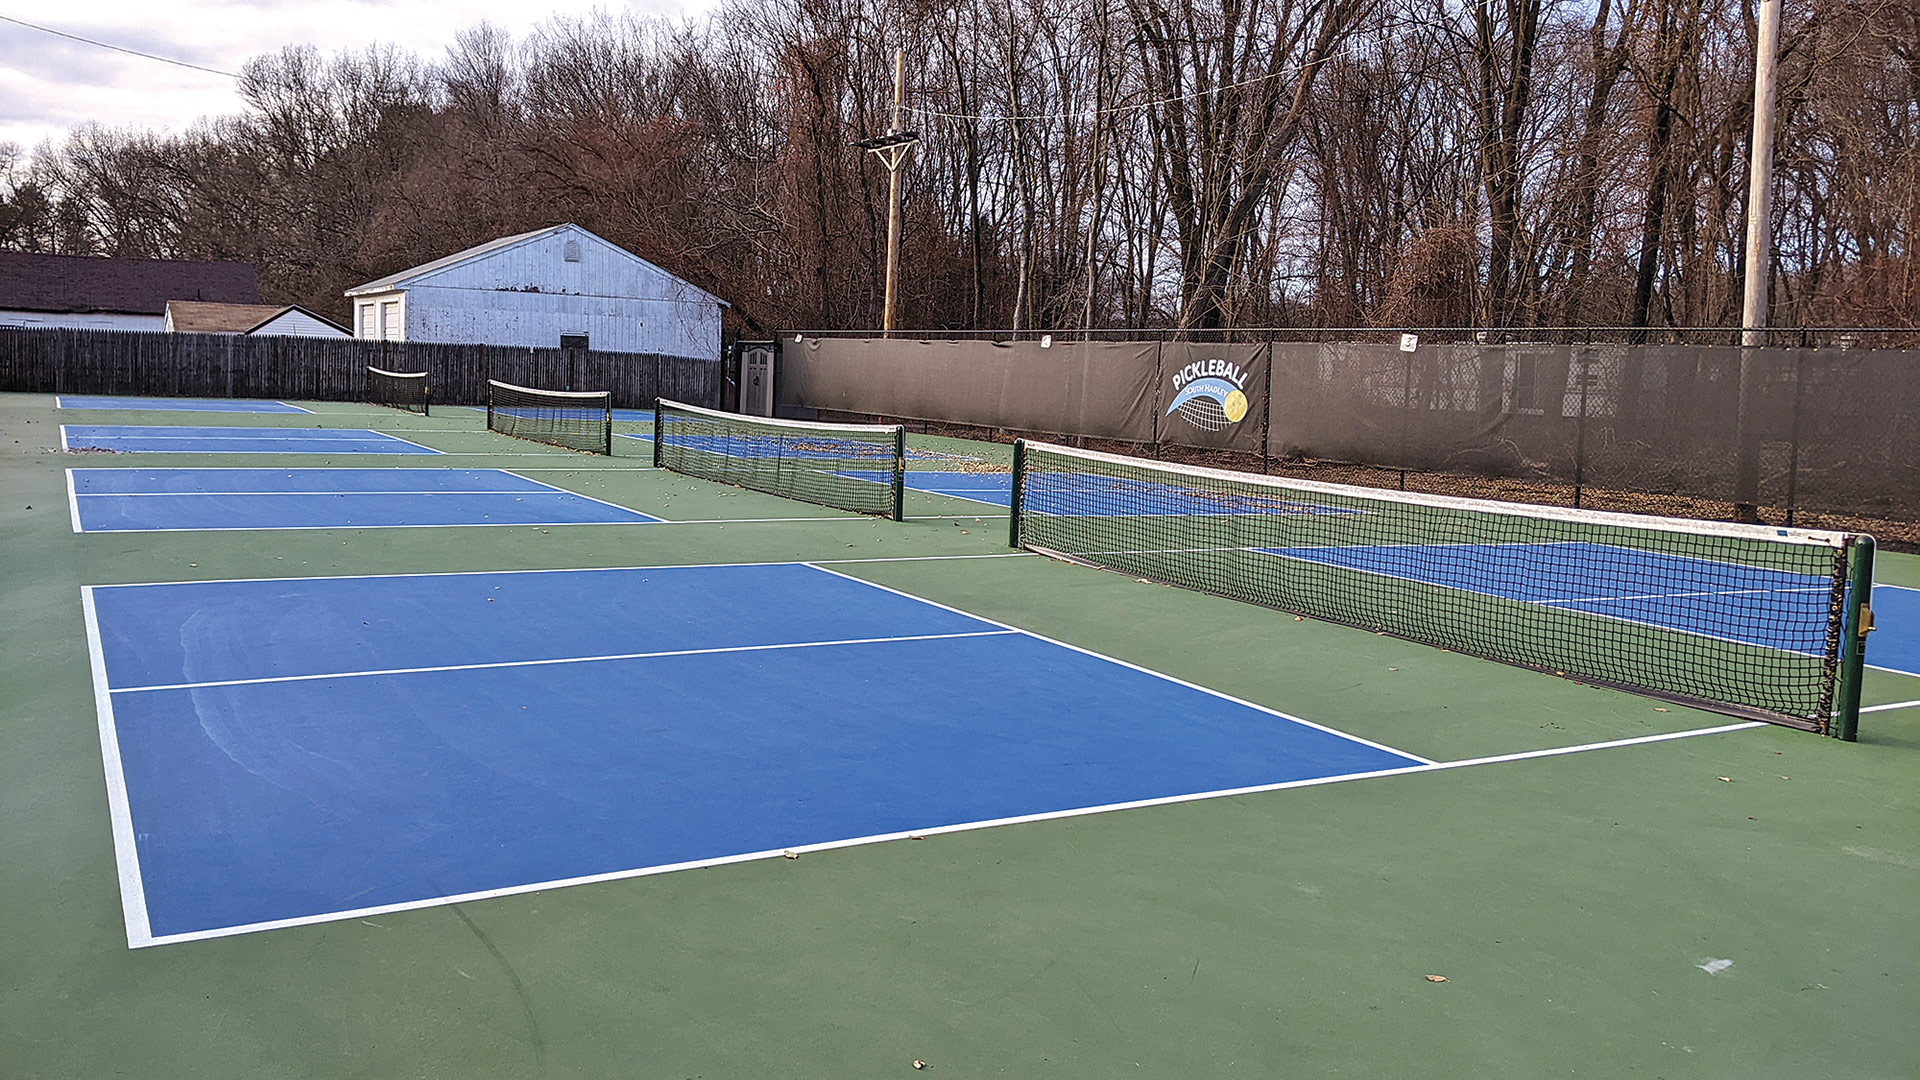 South Hadley’s new pickleball courts